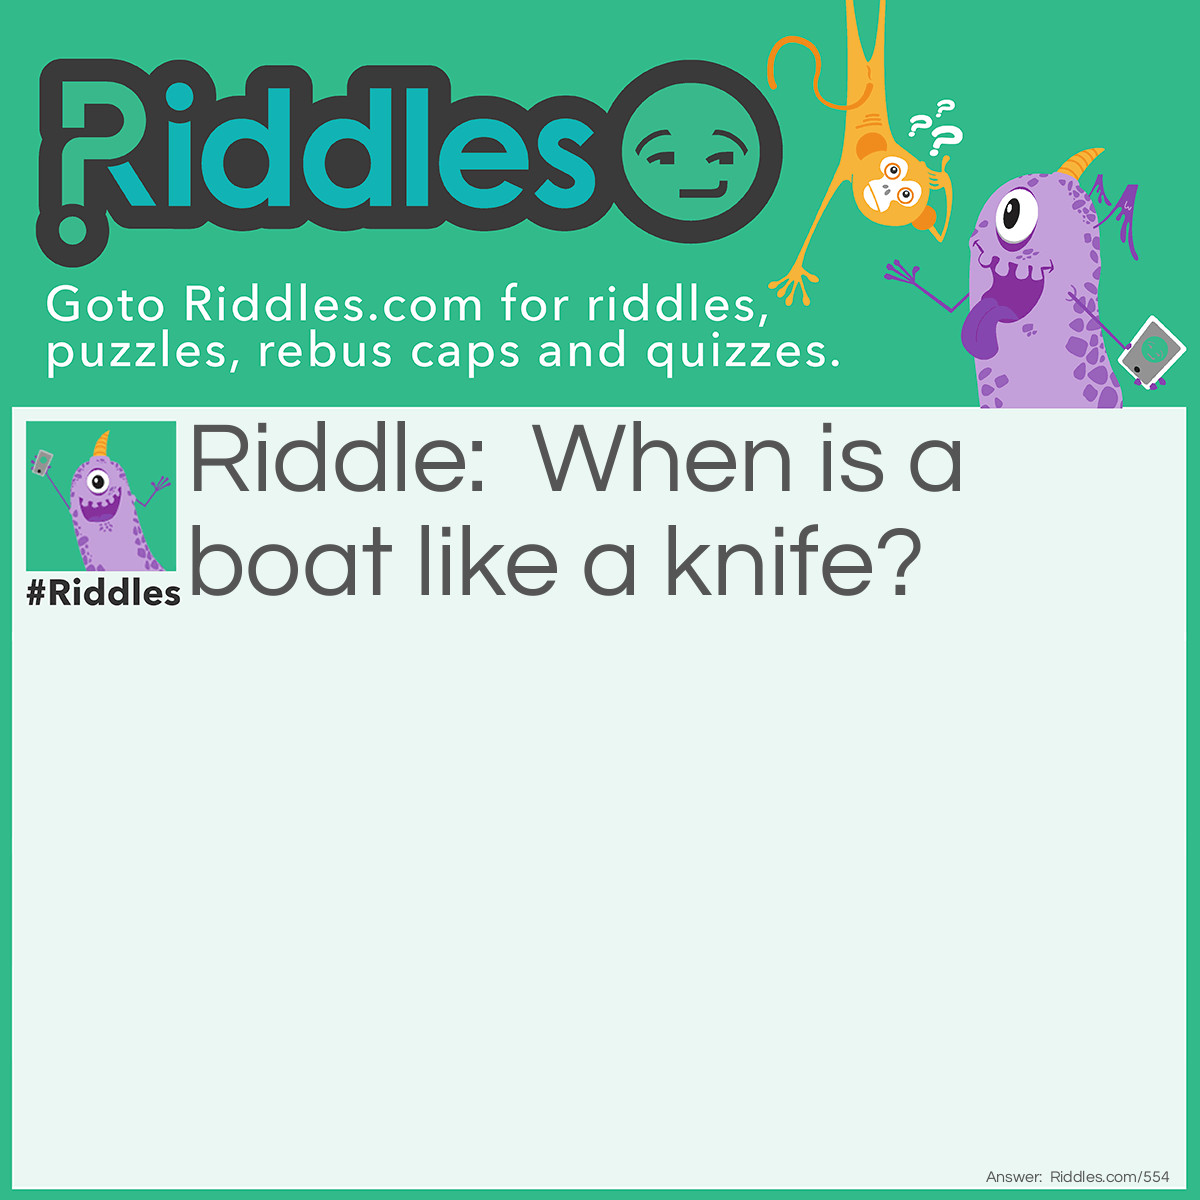 Riddle: When is a boat like a knife? Answer: When it is a cutter.